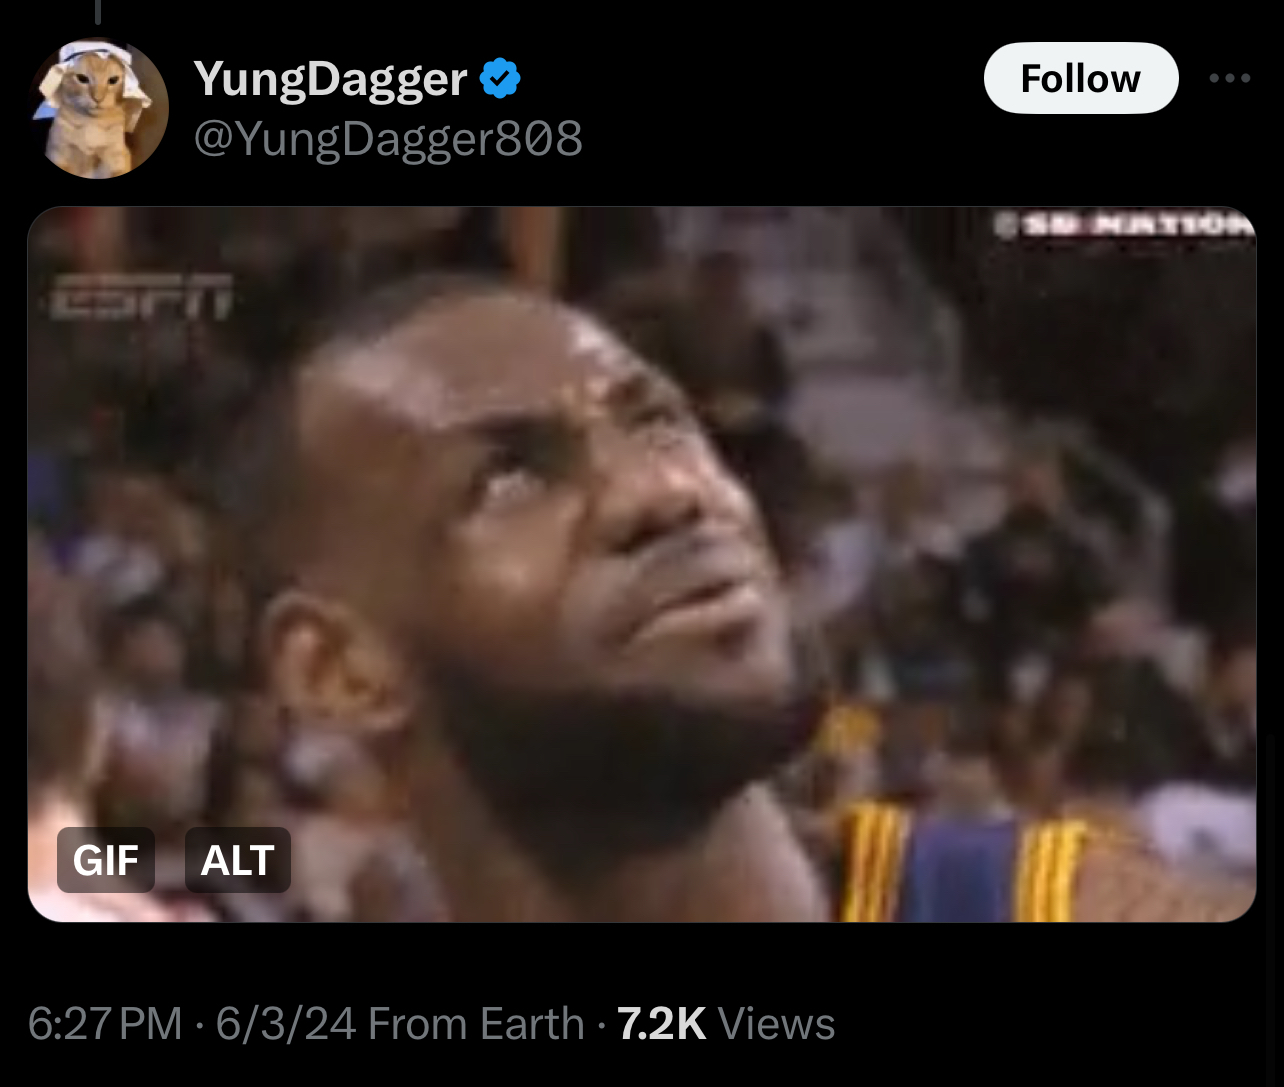 LeBron James looking up in confusion in a basketball game. Tweet by YungDagger (@YungDagger808) with 7.2K views as of 6:27 PM on 6/3/24